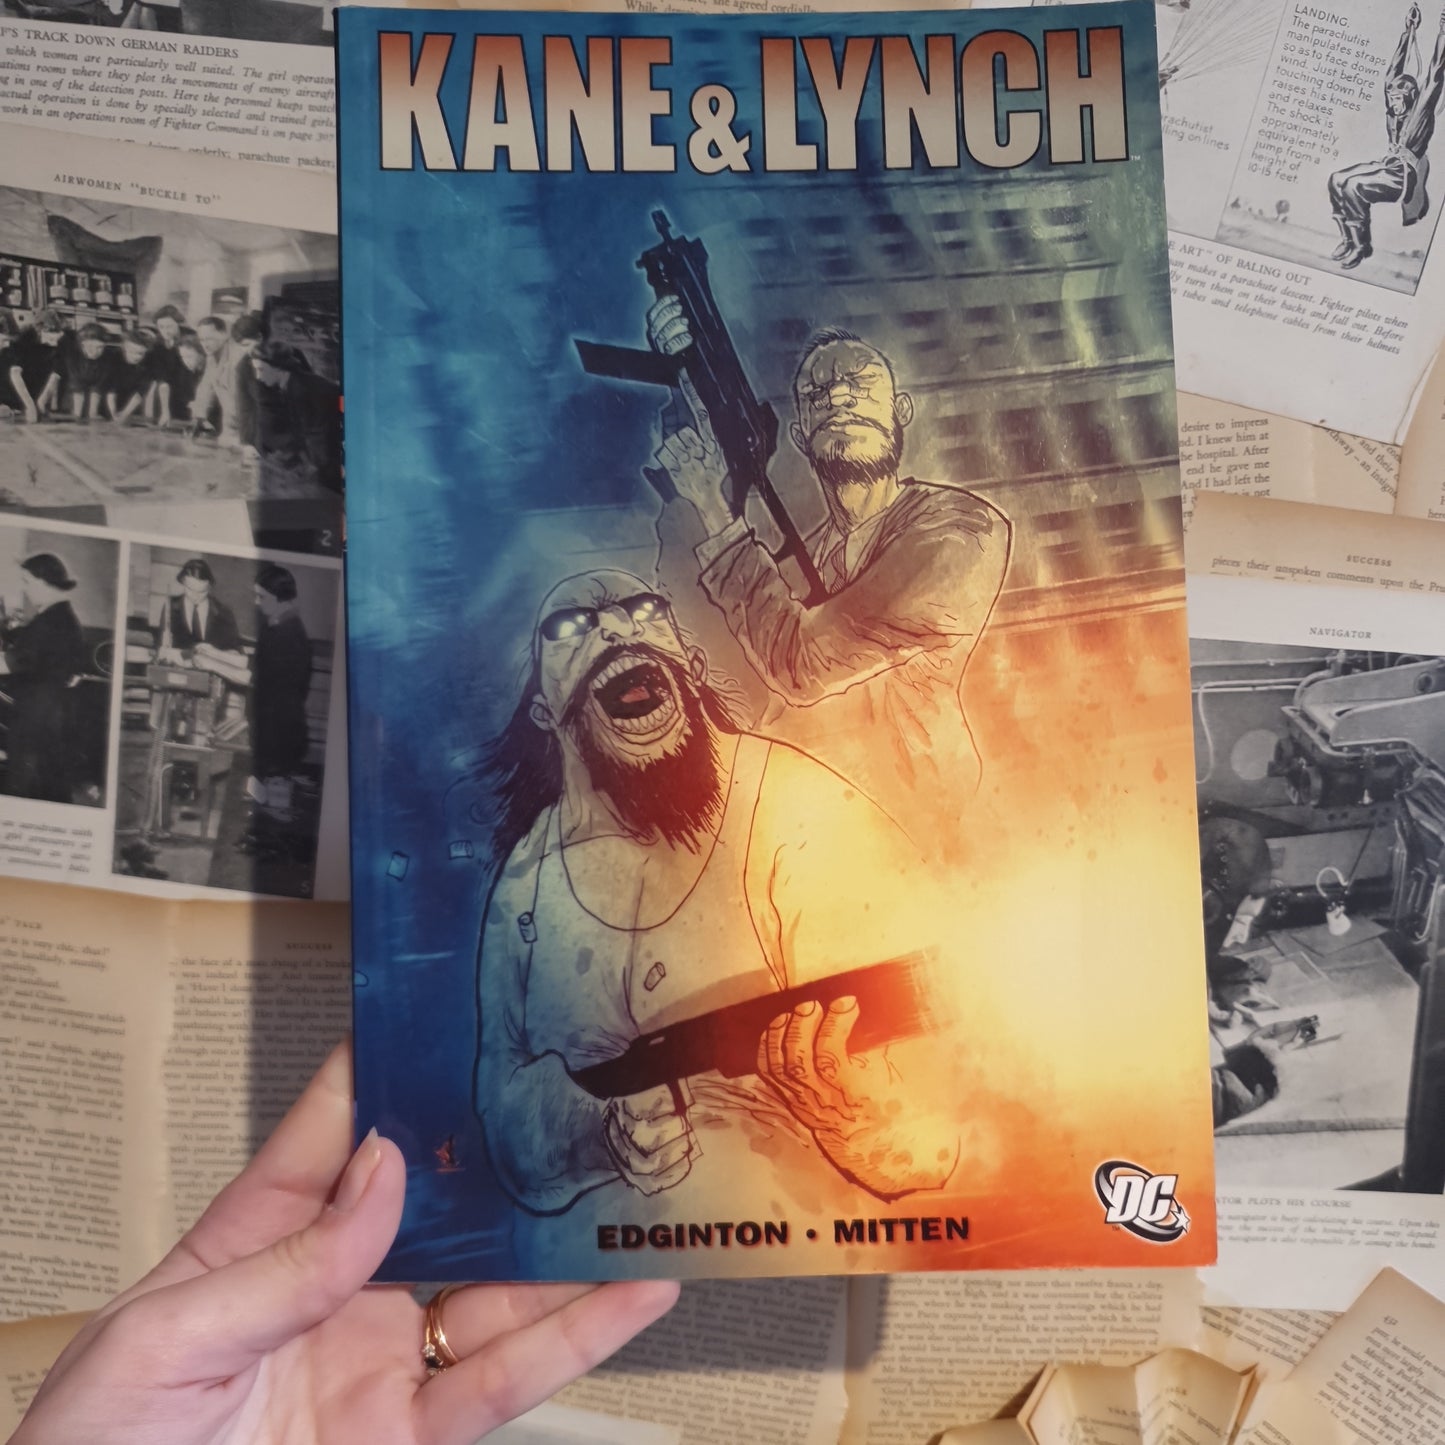 Kane & Lynch by Edginton and Mitten (2010)